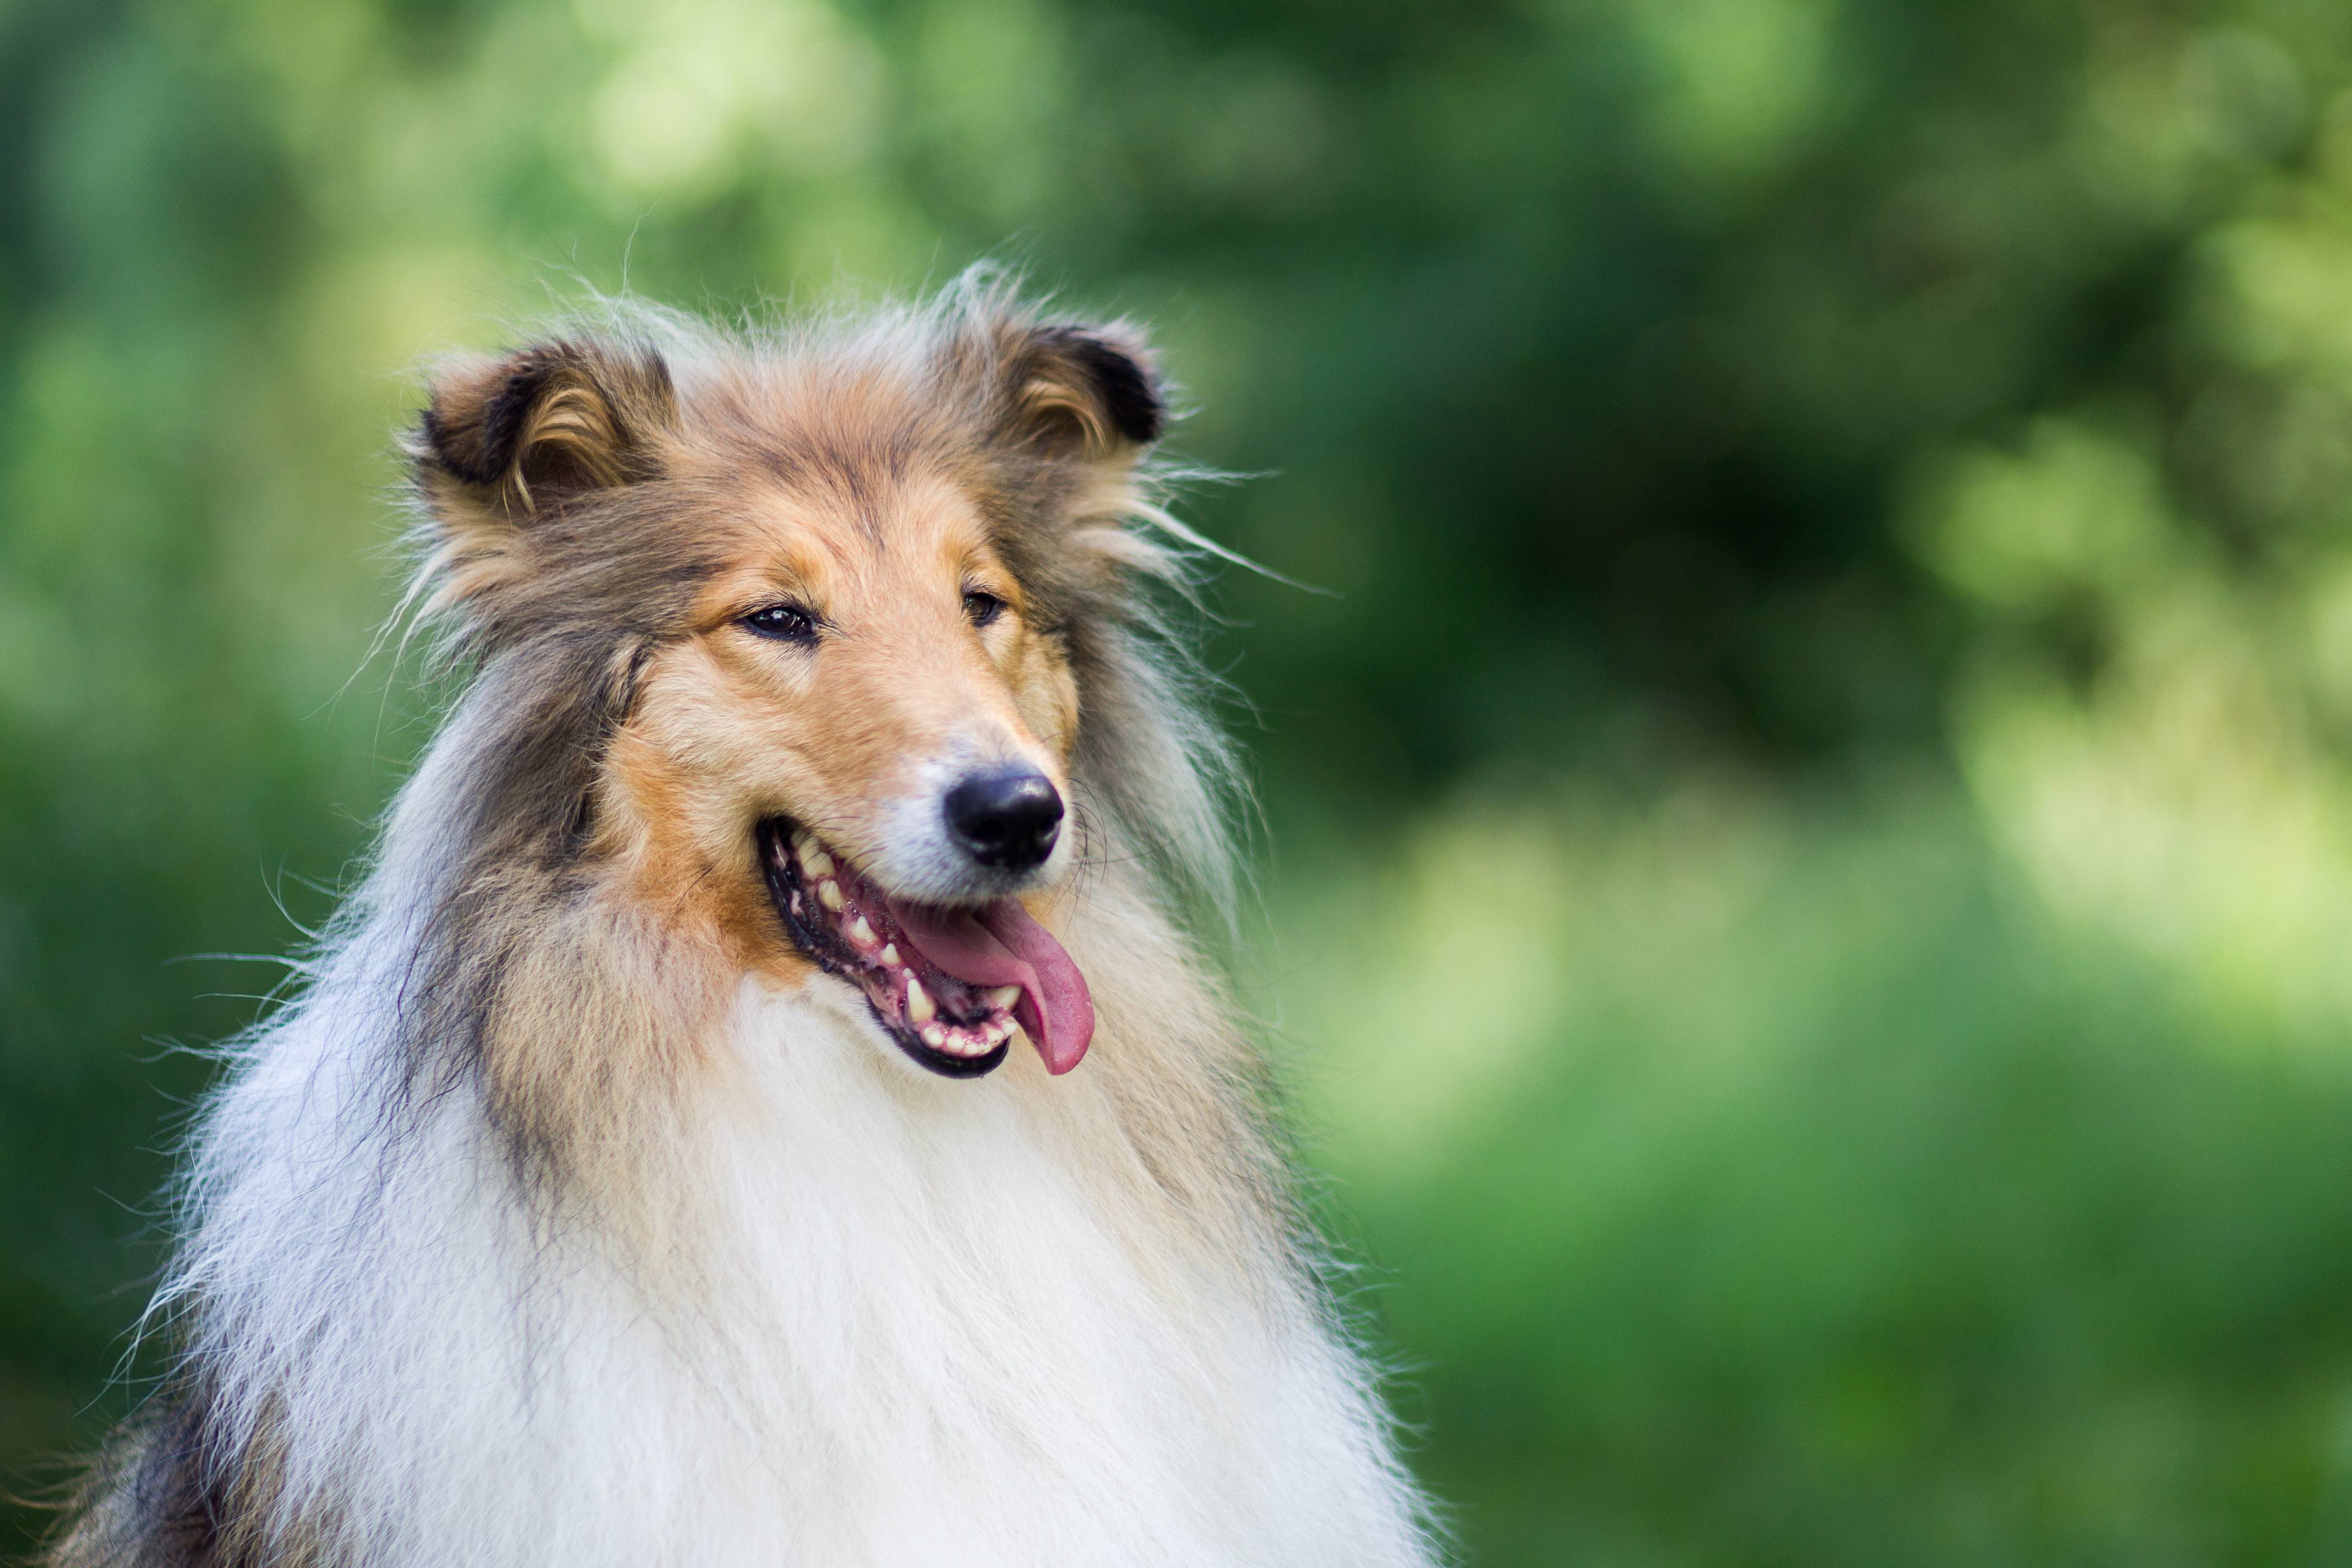 rough collie dog with tongue hanging out